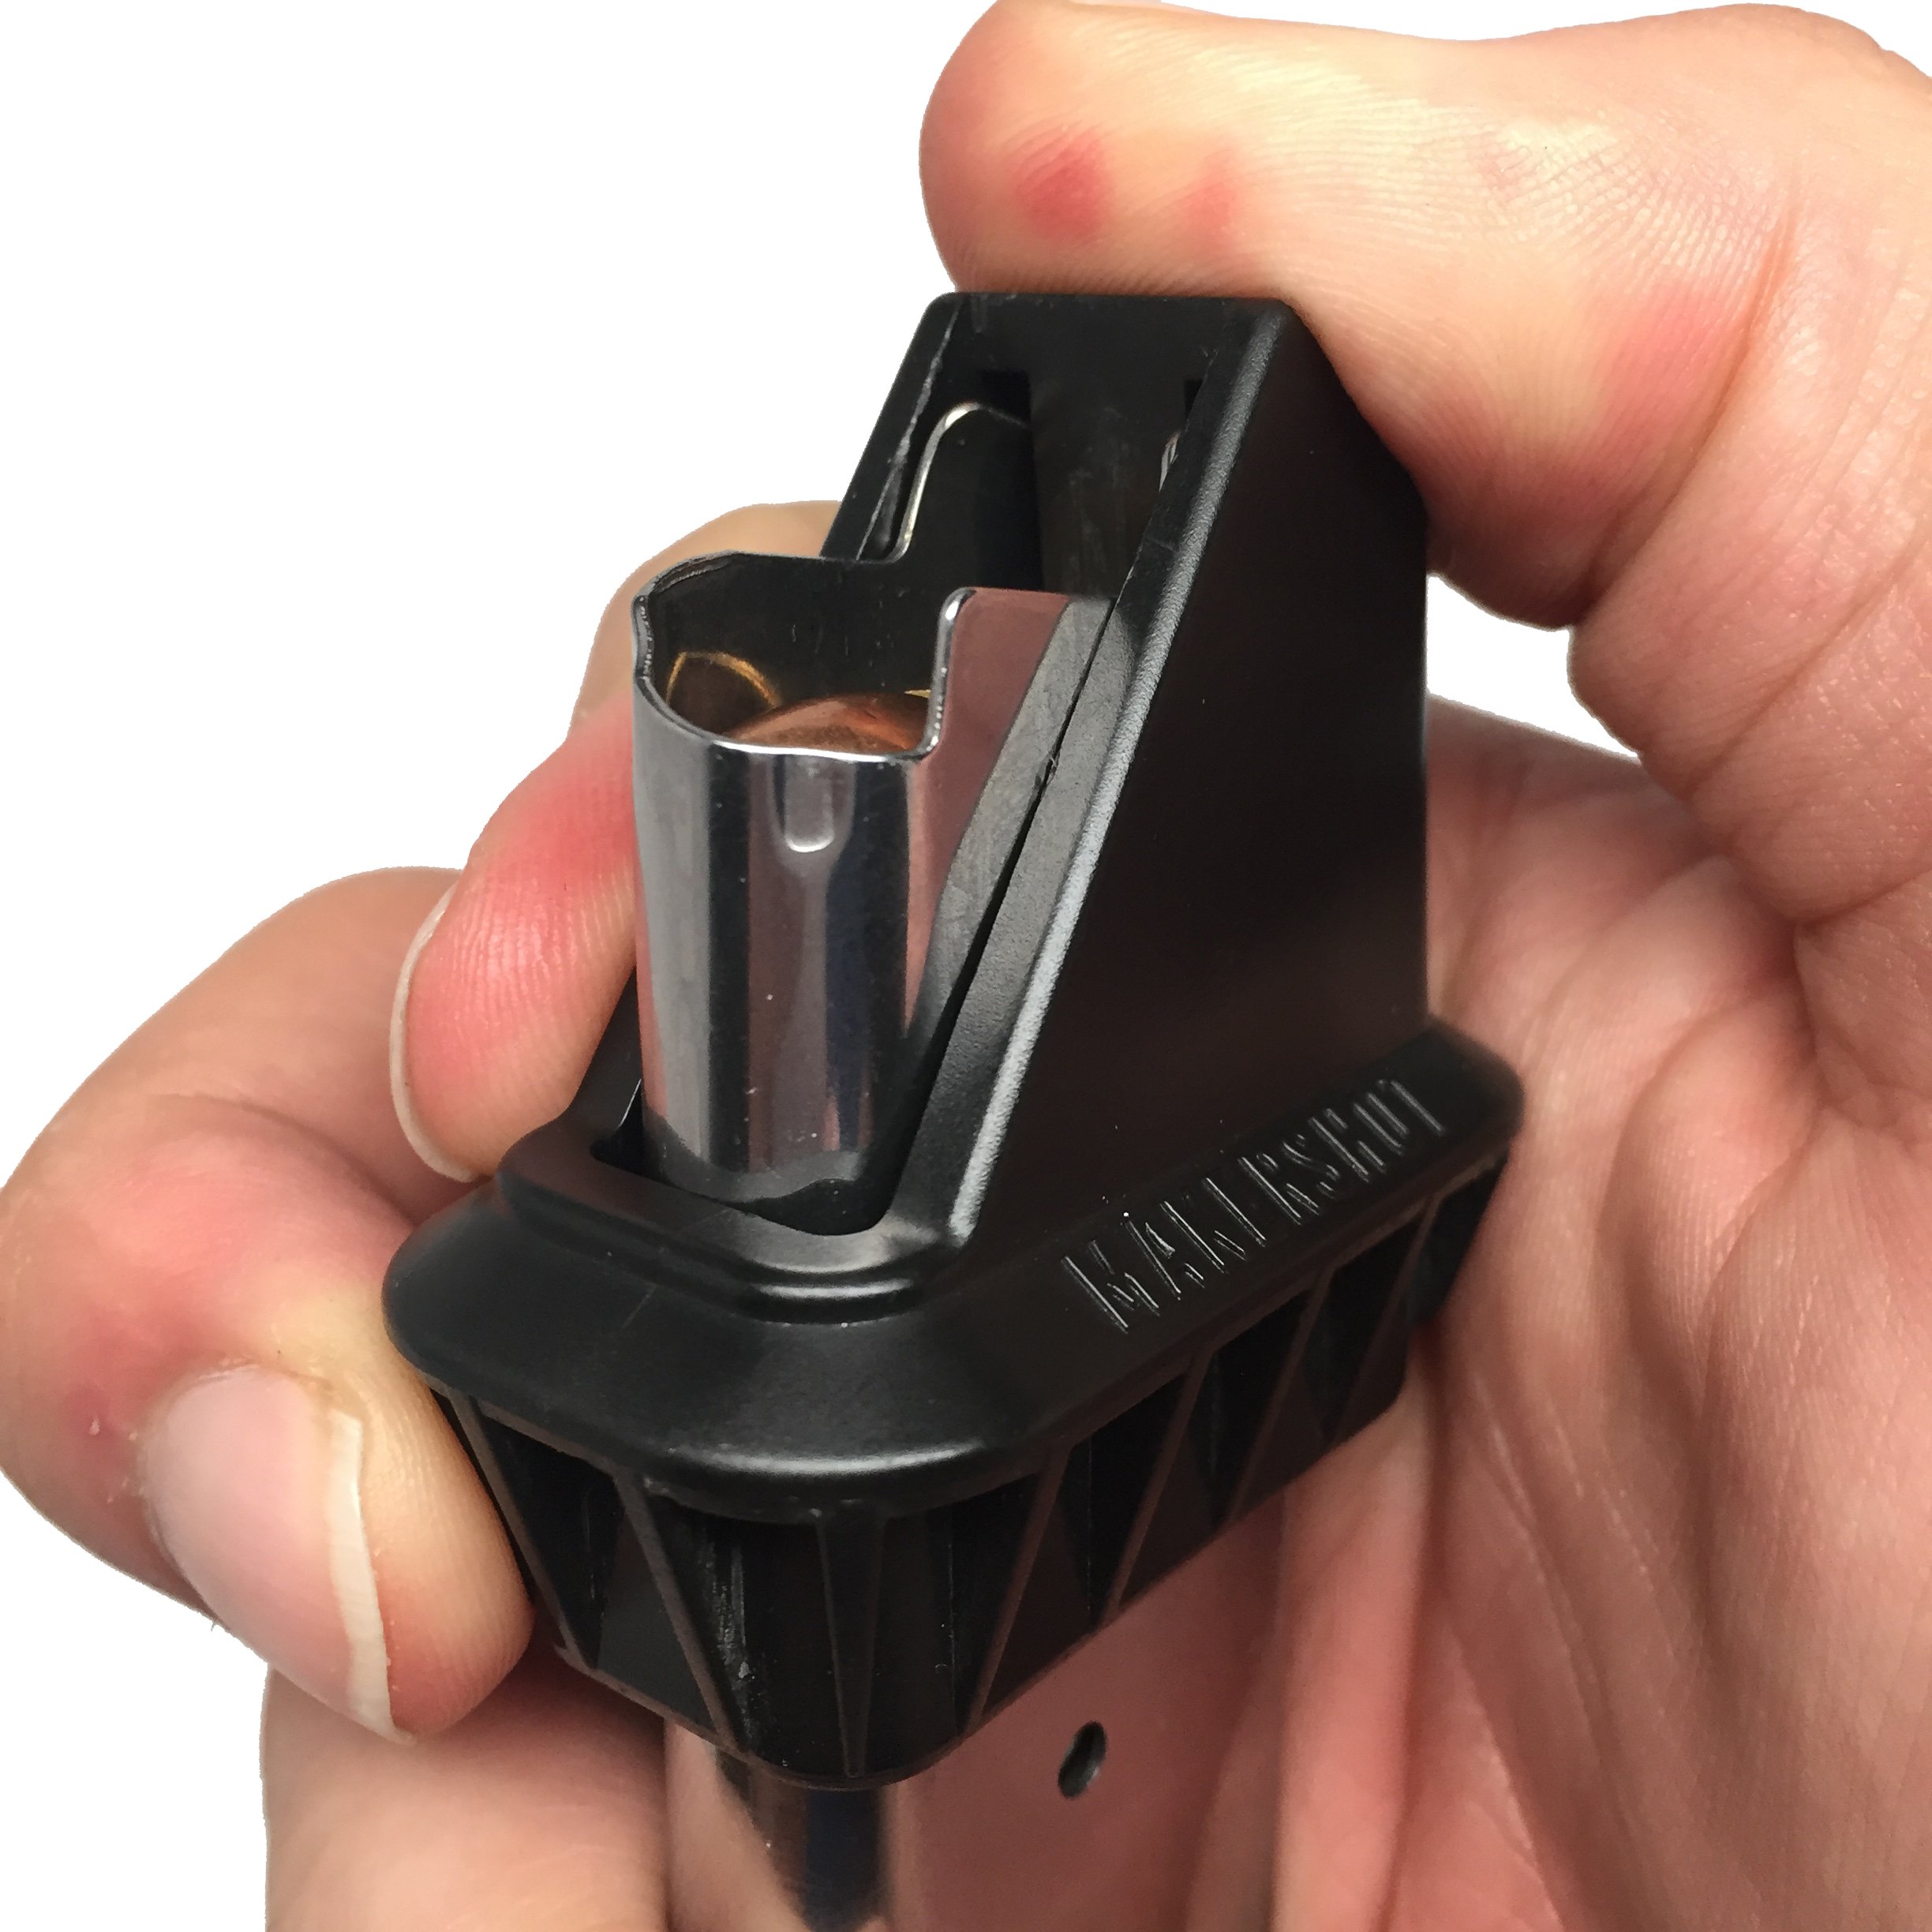 MakerShot Magazine Speed Loaders, Designed Specifically for Each Selected Magazine